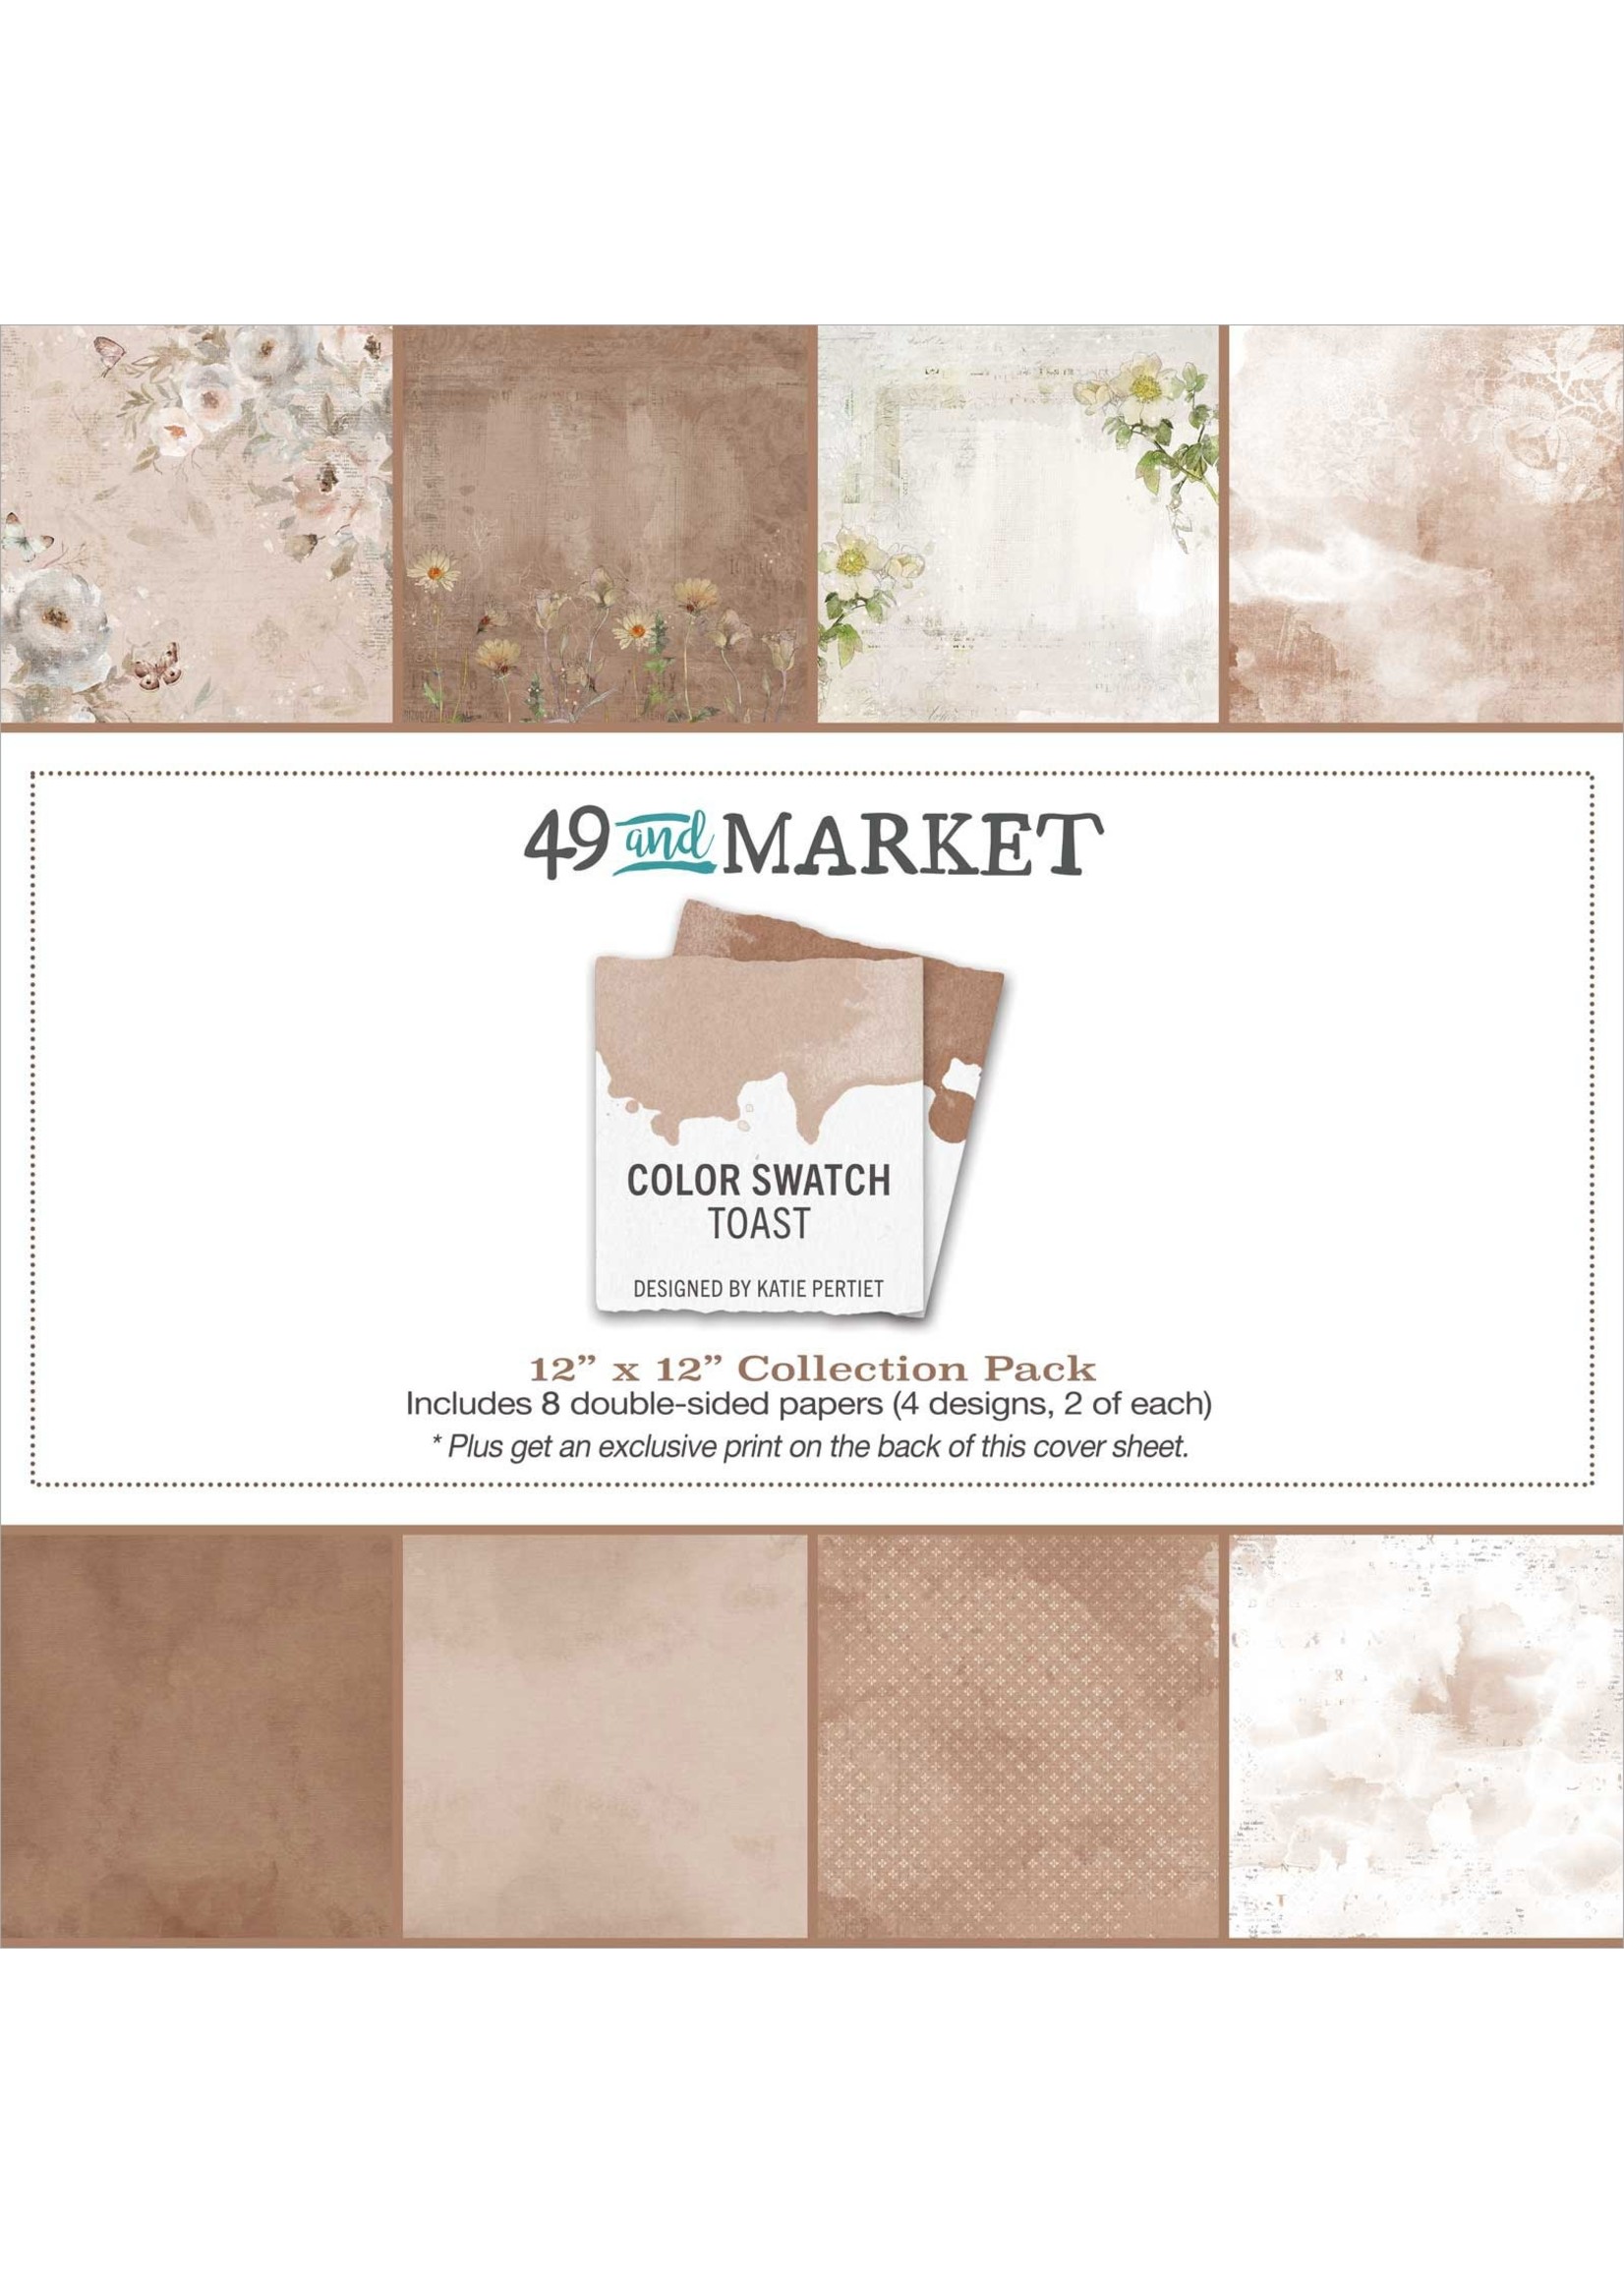 49 and Market Color Swatch Toast Collection Pack 12"X12"